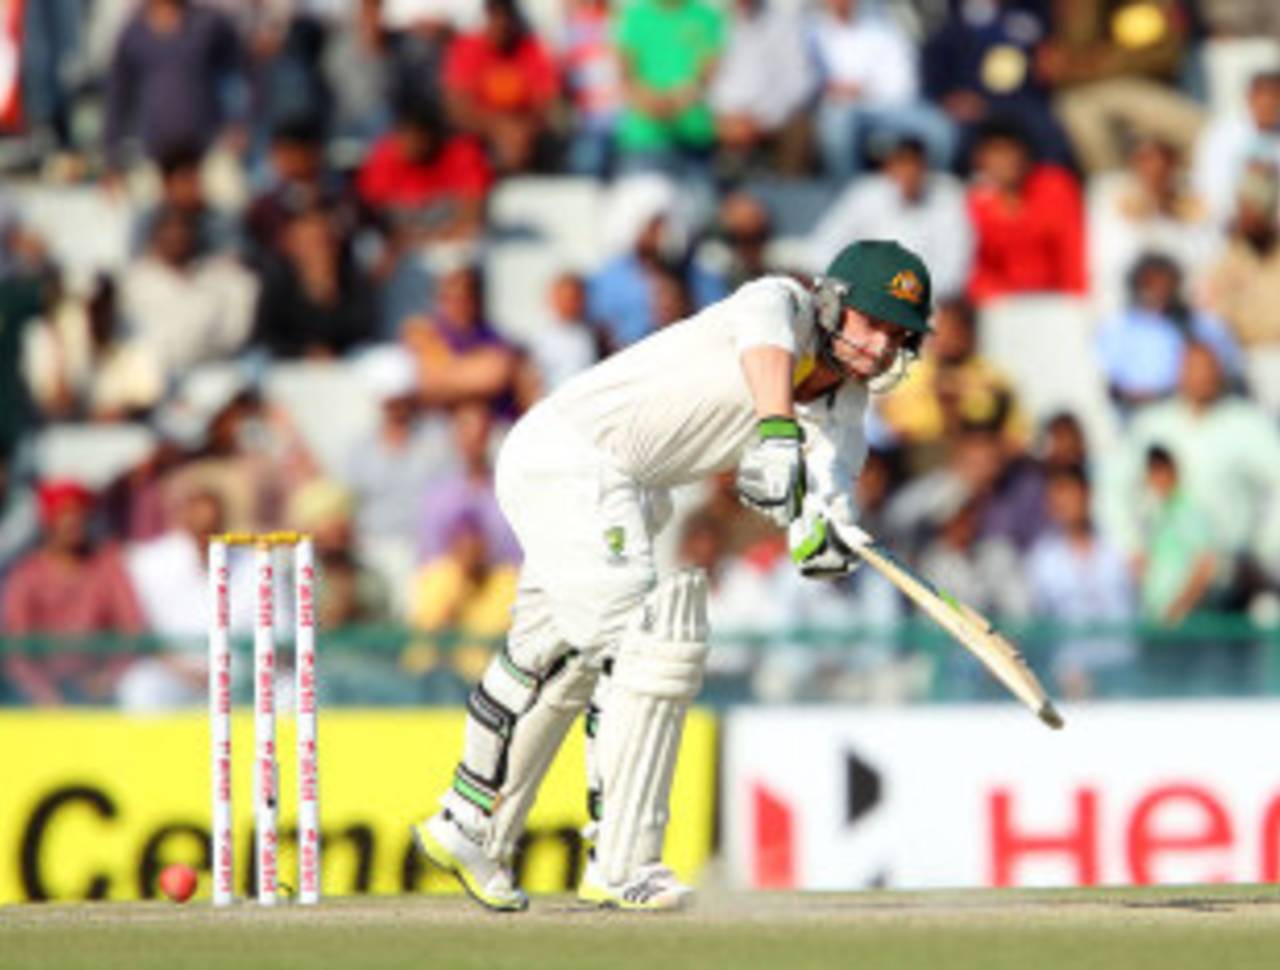 Phillip Hughes got his first substantial score of the series, India v Australia, 3rd Test, Mohali, 4th day, March 17, 2013